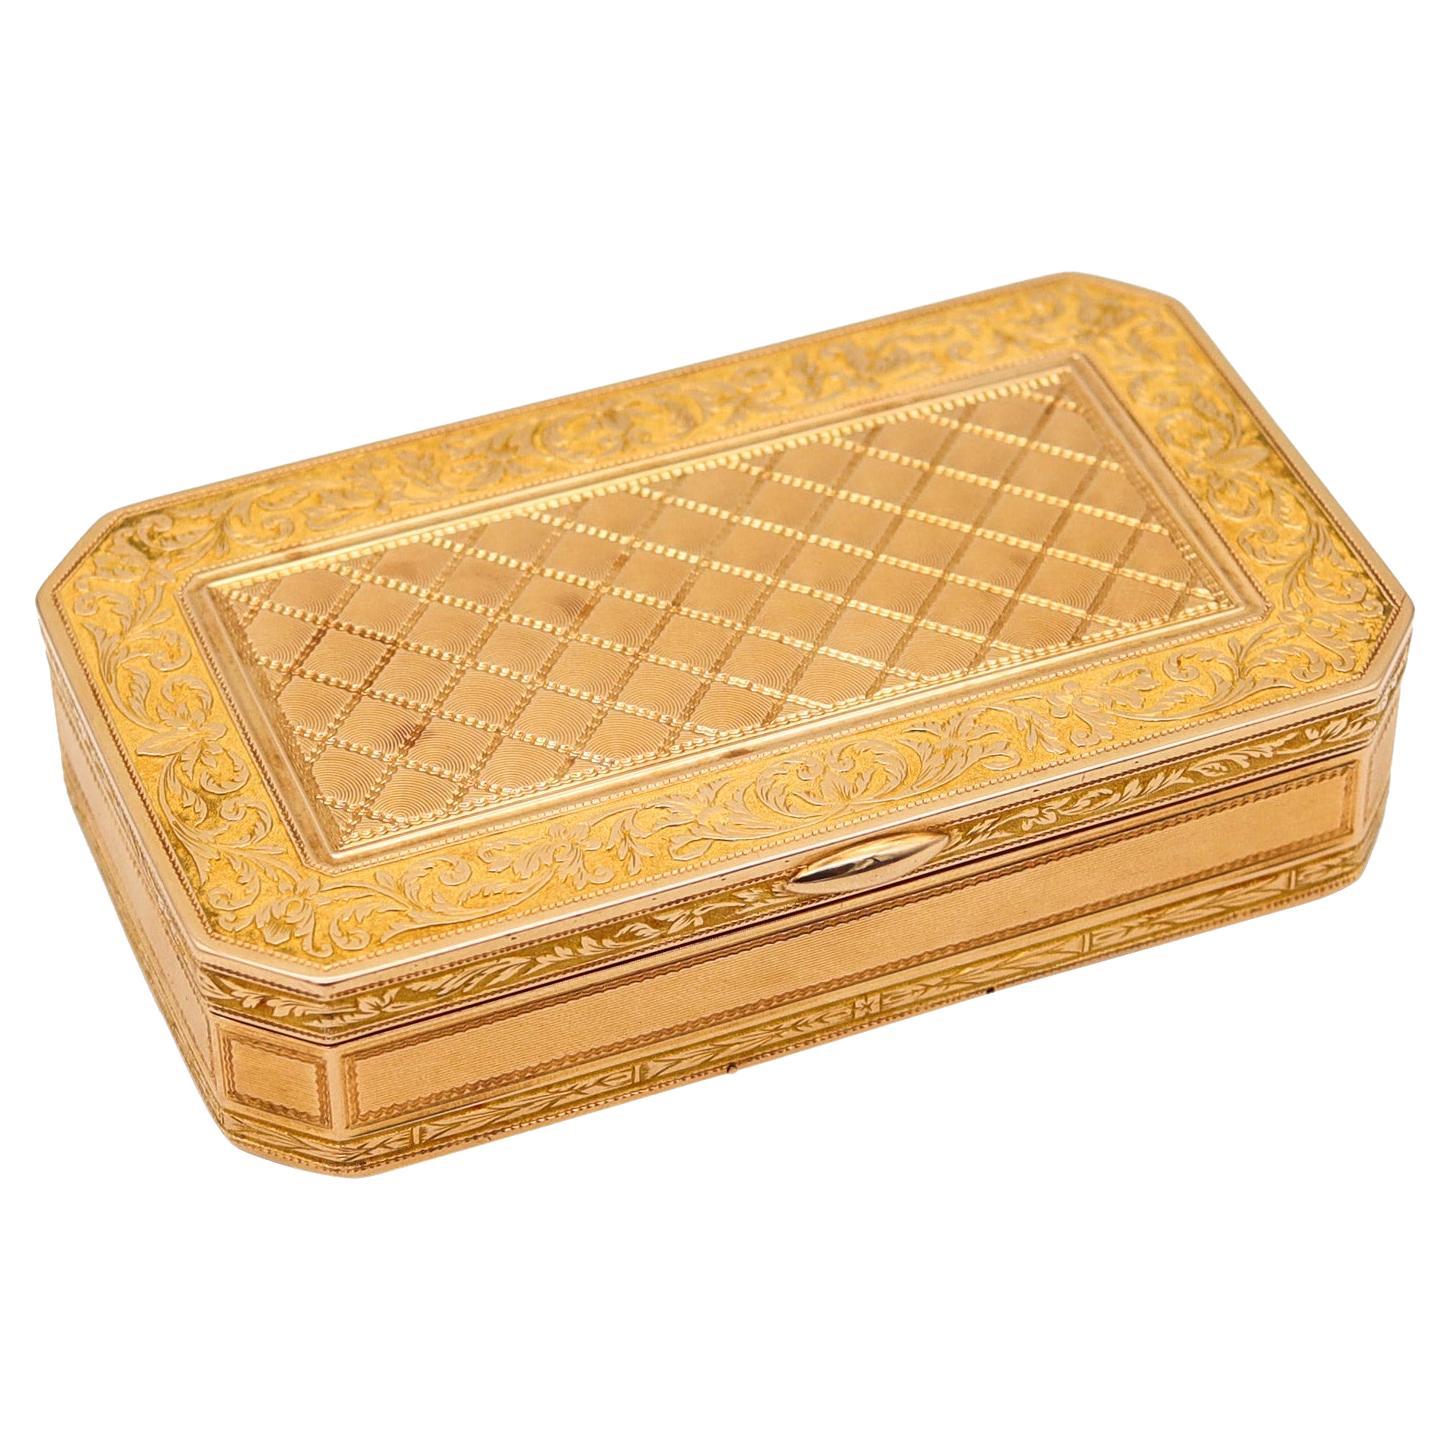 French 1819-1838 Neoclassical Louis XVI Rectangular Snuff Box 18Kt Yellow Gold For Sale